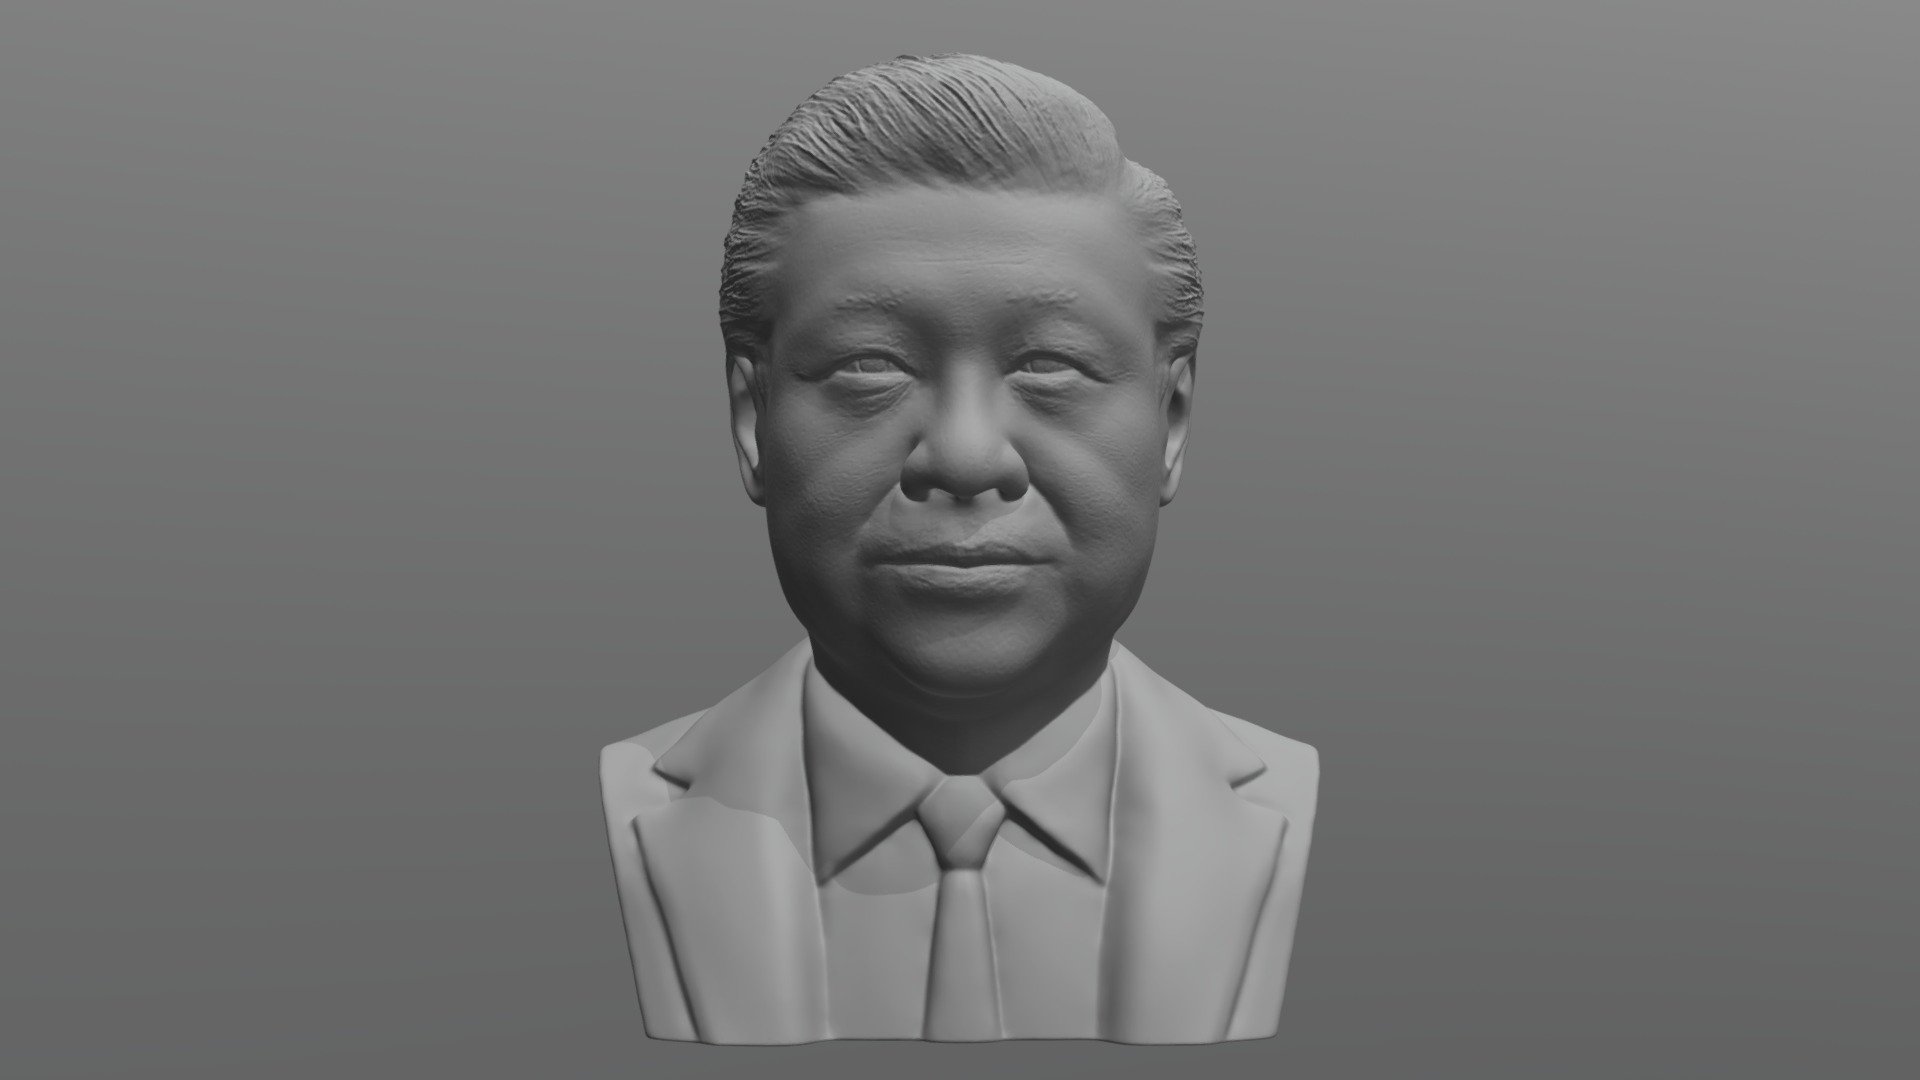 Here is Xi Jinping, President of China bust 3D model ready for 3D printing. The model current size is 5 cm height, but you are free to scale it. Zip file contains stl. The model was created in ZBrush.

If you have any questions please don’t hesitate to contact me. I will respond you ASAP. I encourage you to check my other celebrity 3D models 3d model